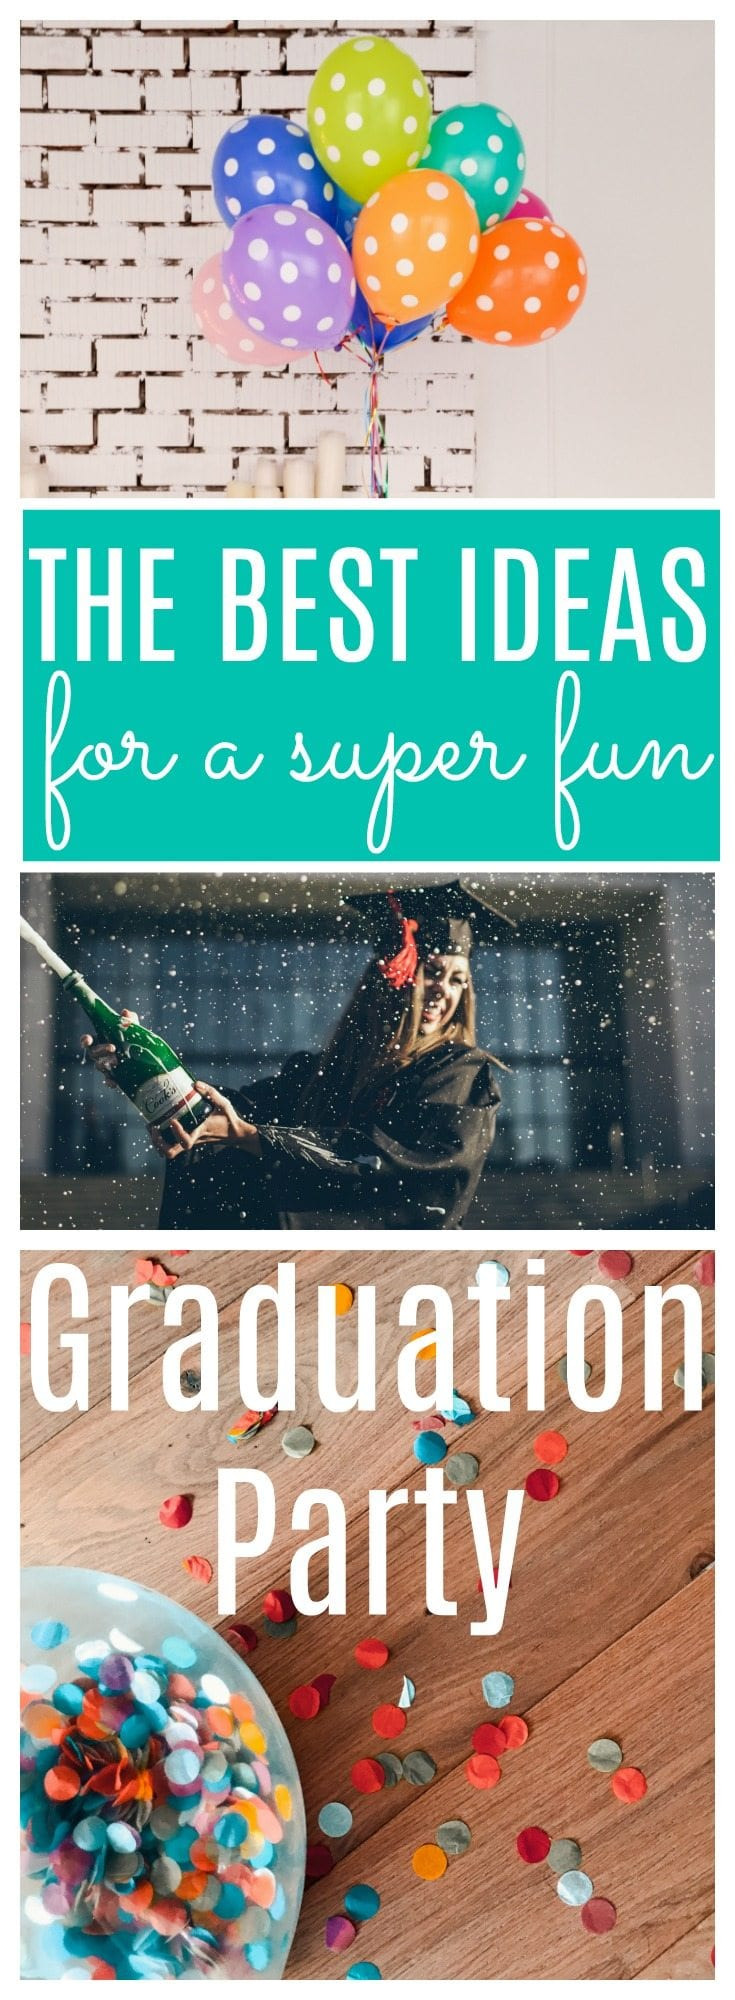 College Graduation Party Ideas For Him
 Graduation Party Ideas How to Celebrate Your Senior s Big Day